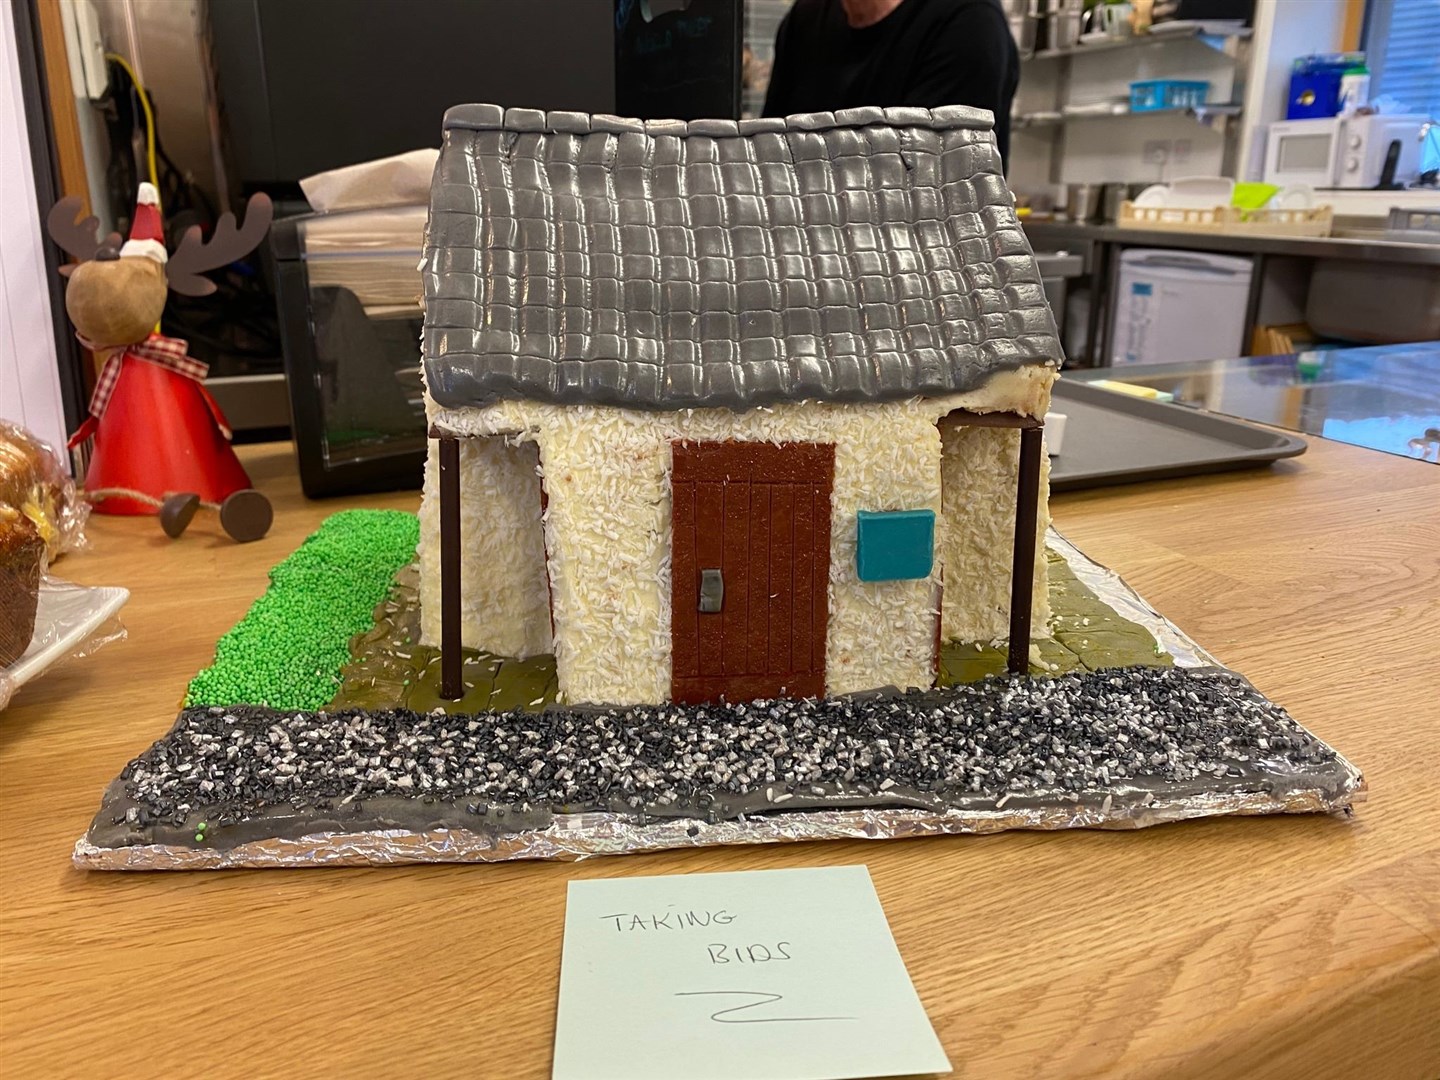 The Kinlochewe Public Toilets cake raised over £100.